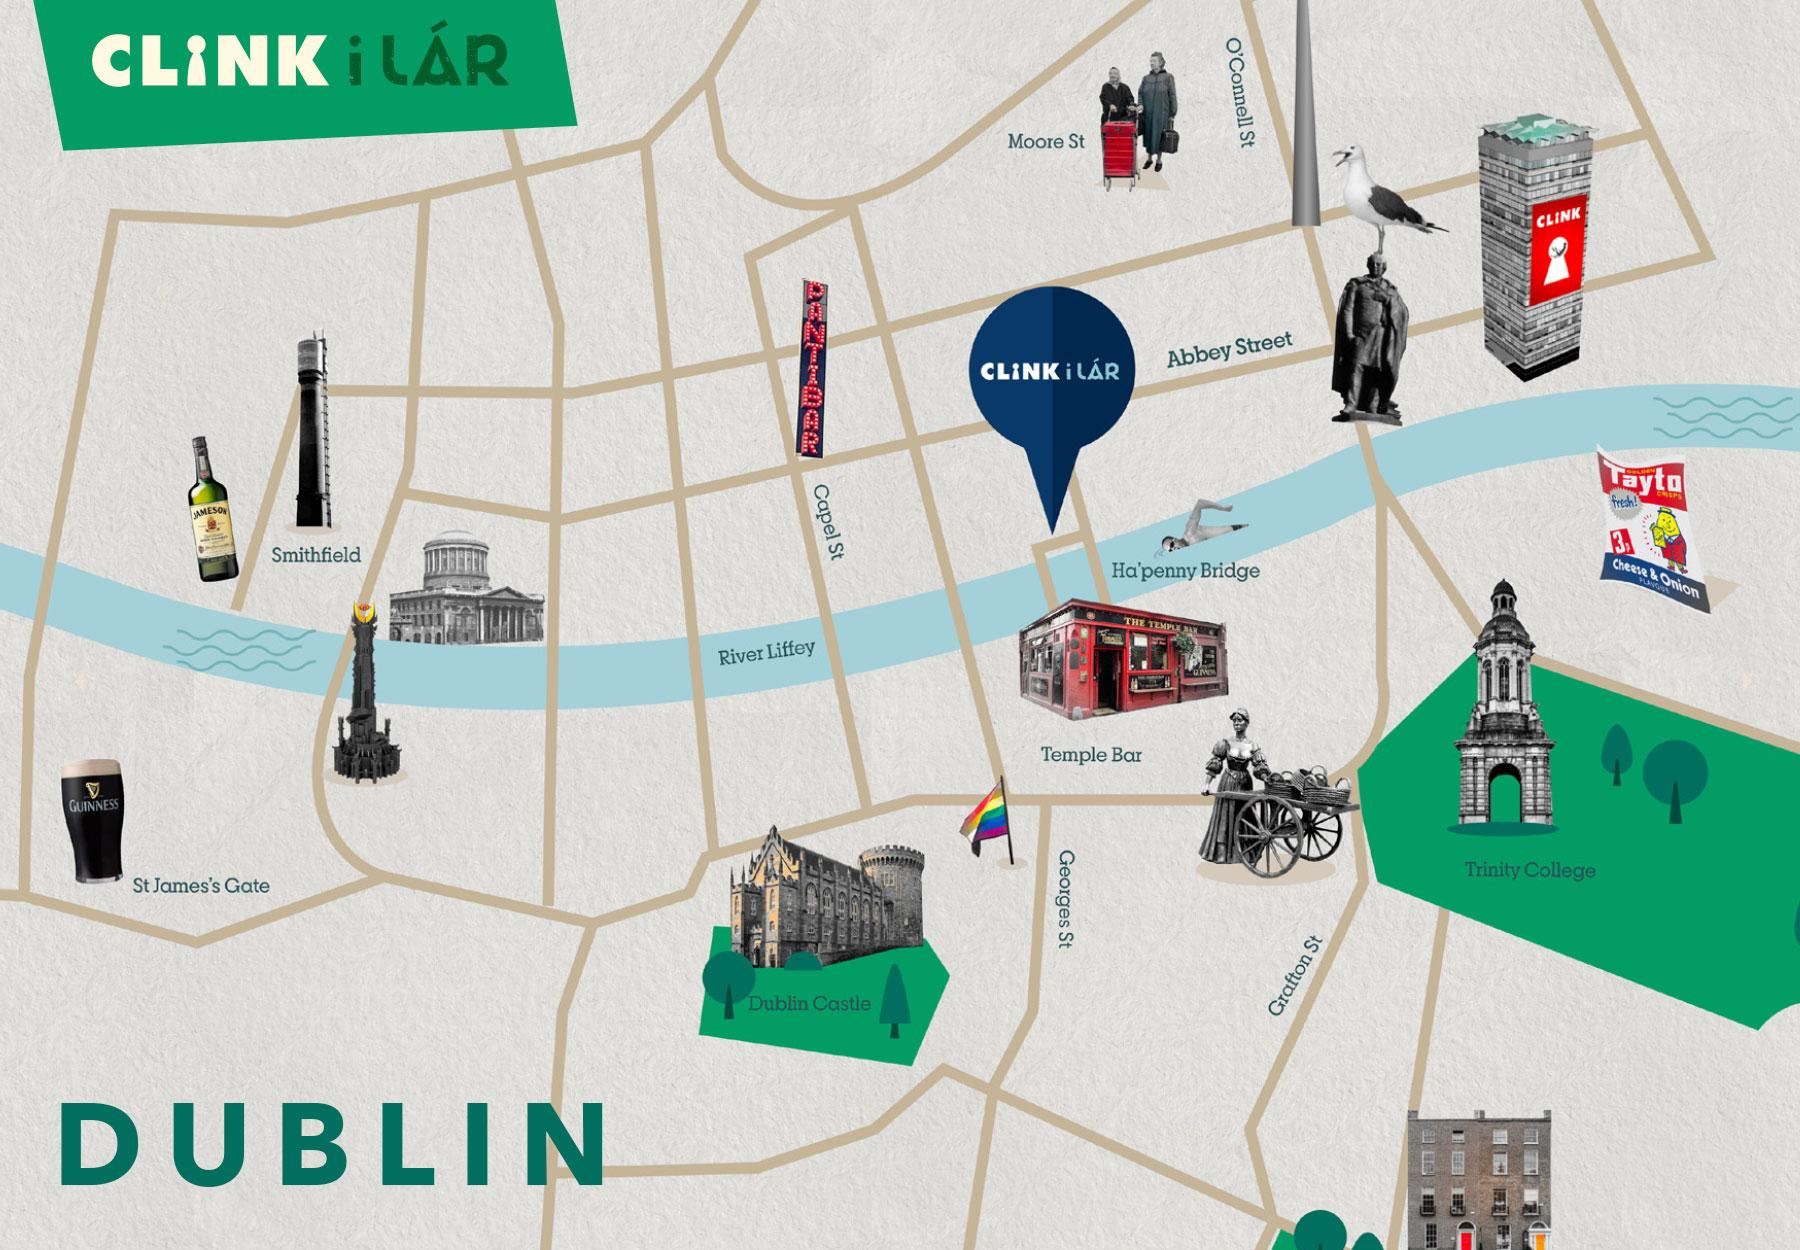 A Dublin City Map with key attractions and Clink i Lar's location